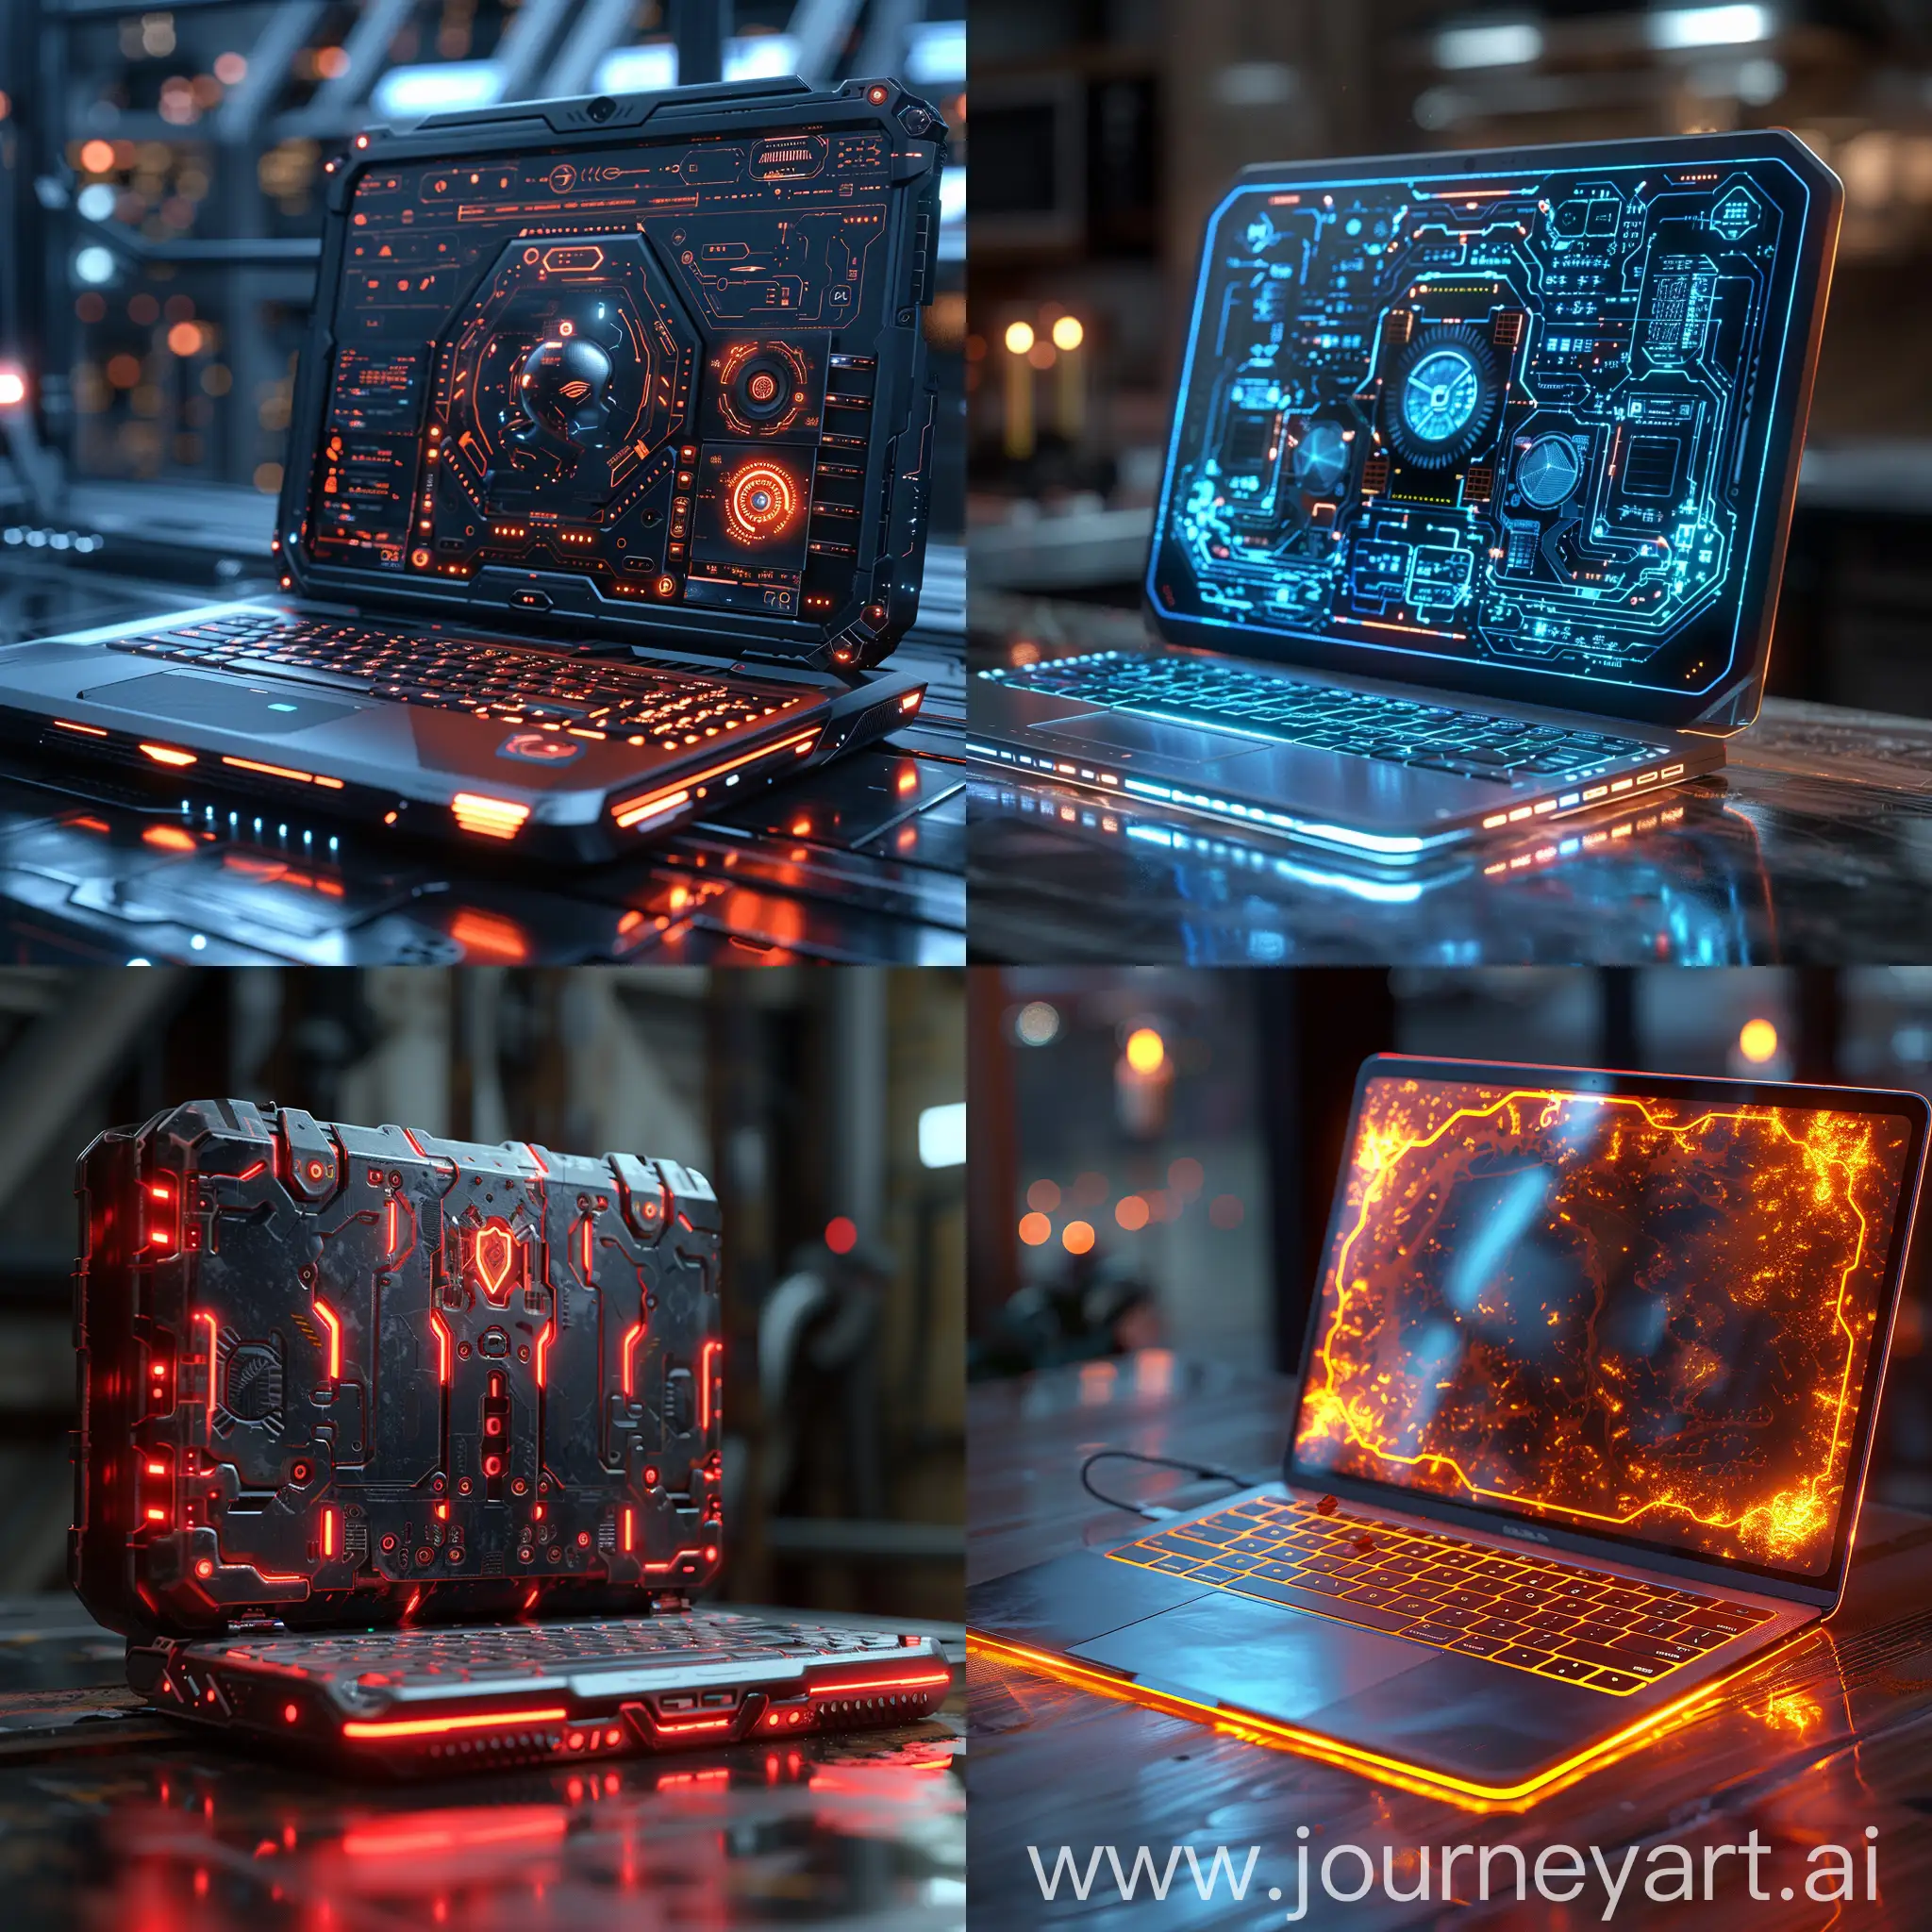 Futuristic-Laptop-with-HighTech-Features-and-NonTraditional-Technologies